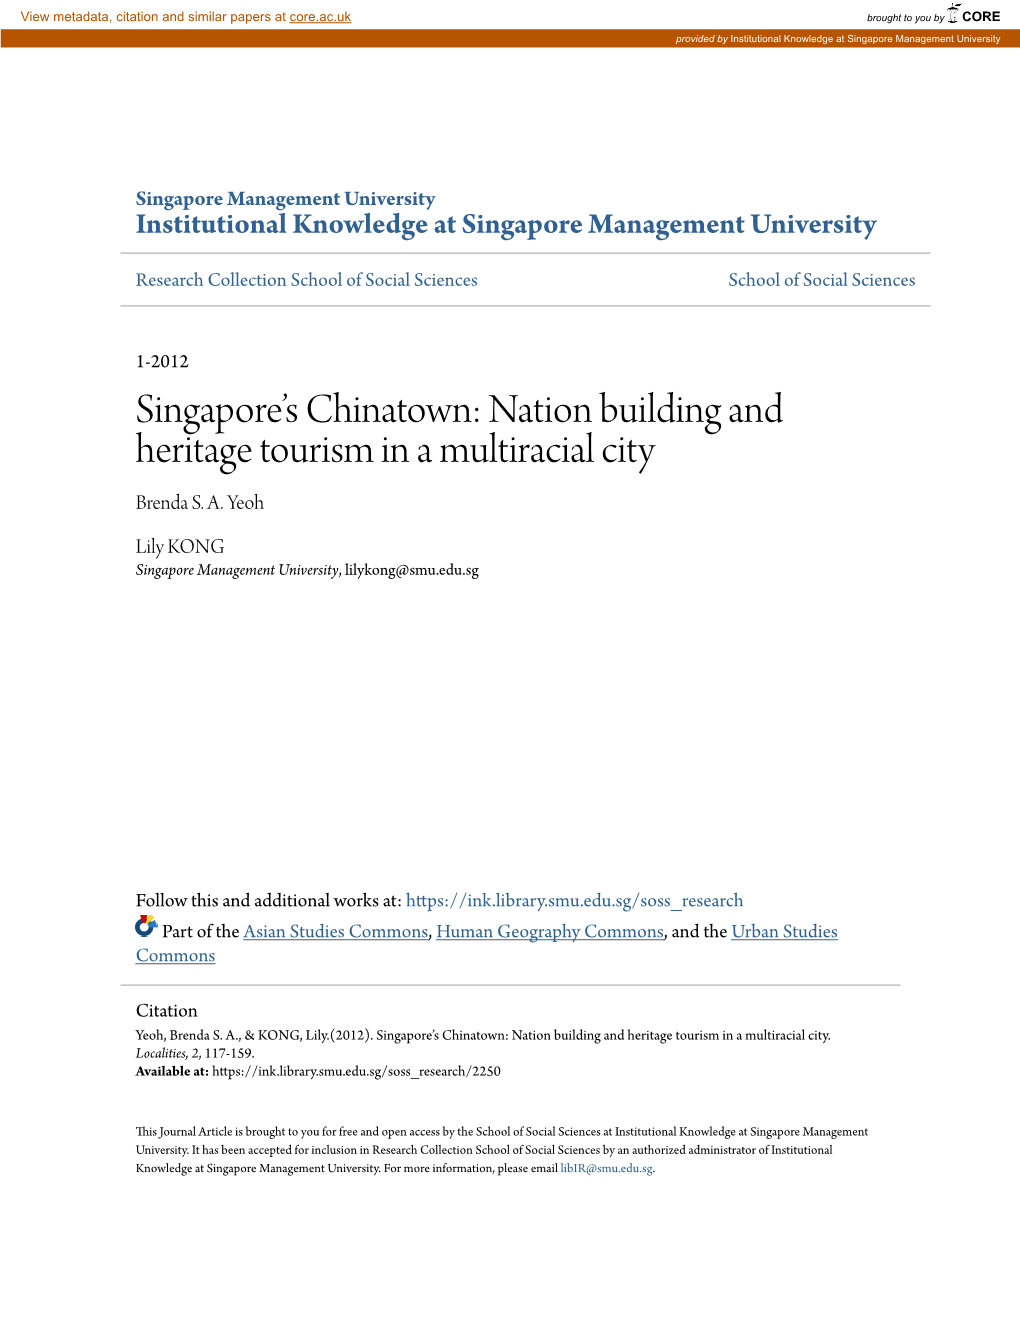 Singapore's Chinatown: a Case Study in Conservation and Promotion” Tourism Management 21 (2000), Pp